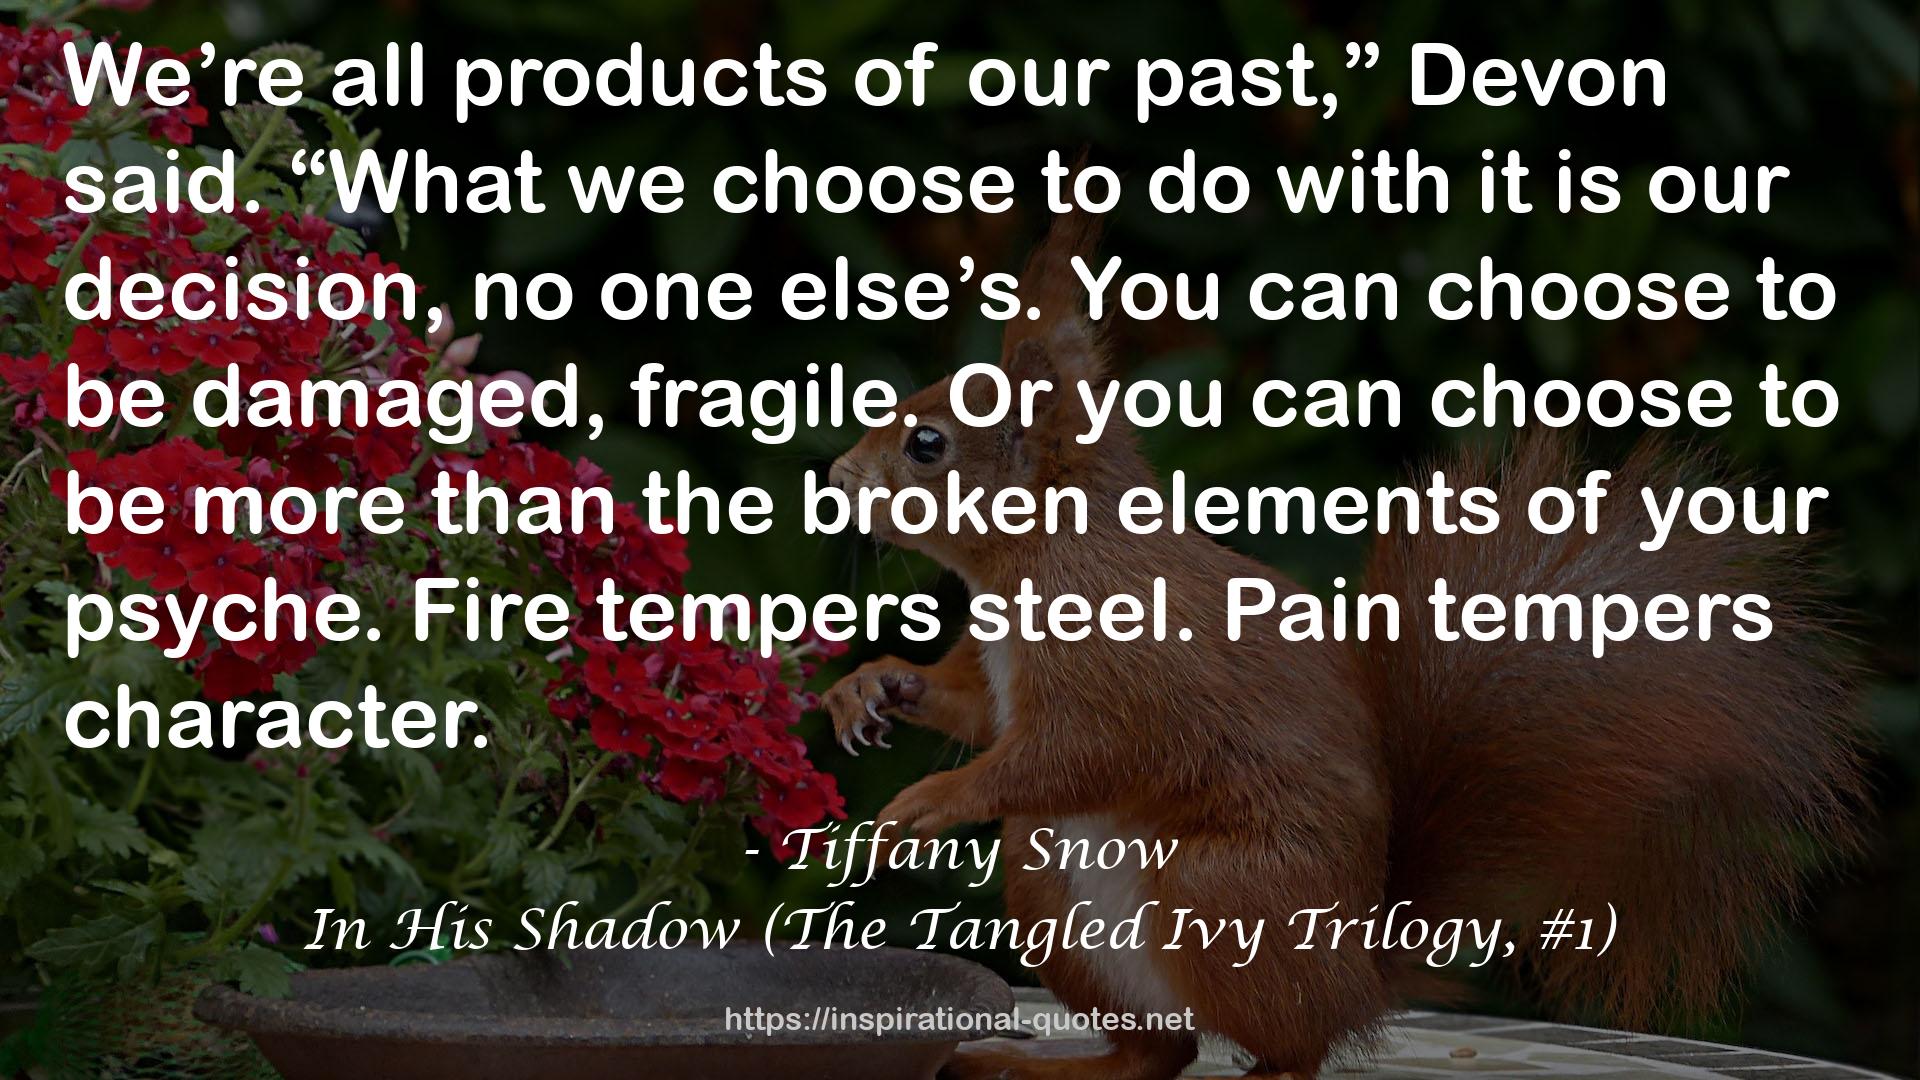 In His Shadow (The Tangled Ivy Trilogy, #1) QUOTES